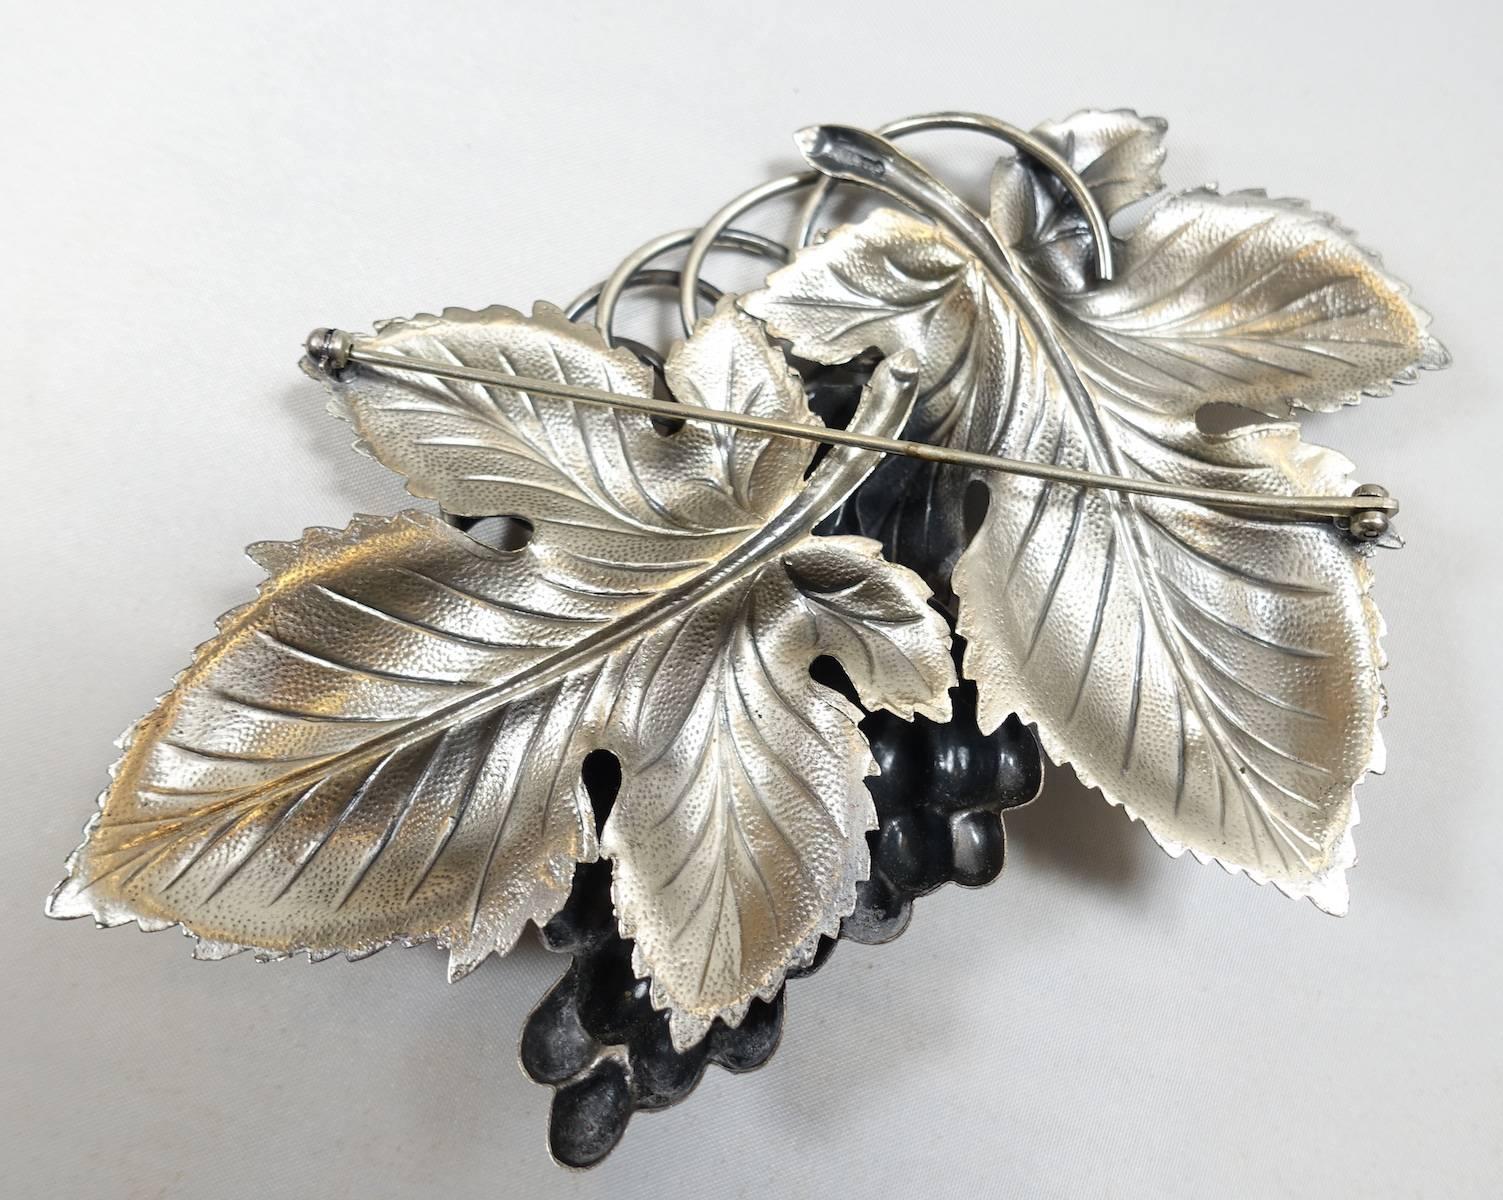 This is the famous huge Napier grape leaf brooch, known to be one of Napier’s most popular designs and collectors love them!  It’s made of silver plated brass. It measures 3-1/8” x 5” and is signed “Napier”.   It is in excellent condition.